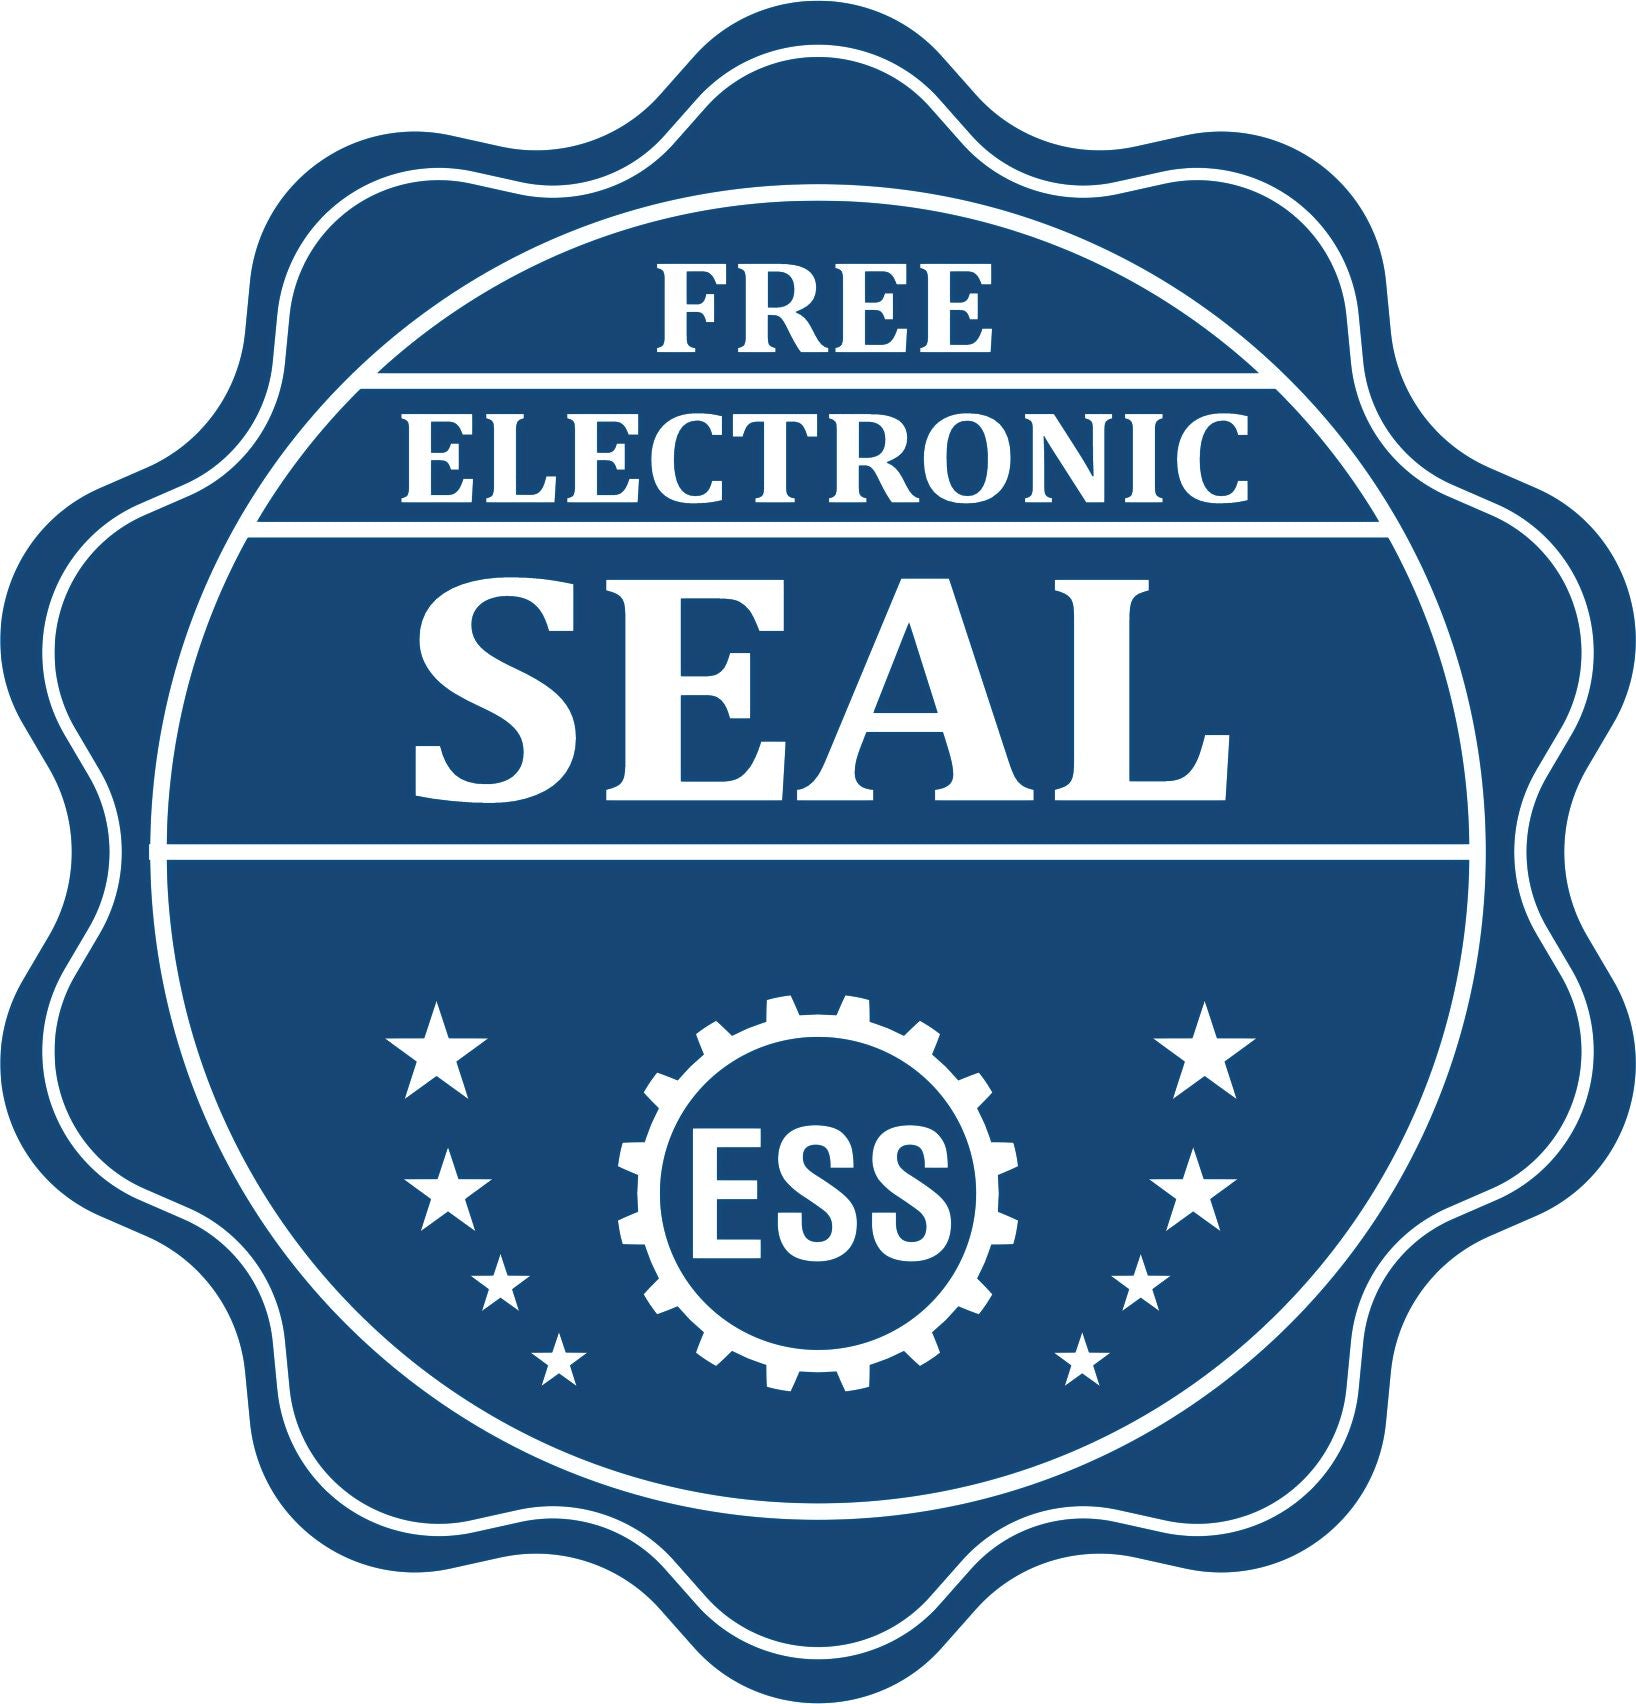 A badge showing a free electronic seal for the State of Tennessee Extended Long Reach Landscape Architect Seal Embosser with stars and the ESS gear on the emblem.